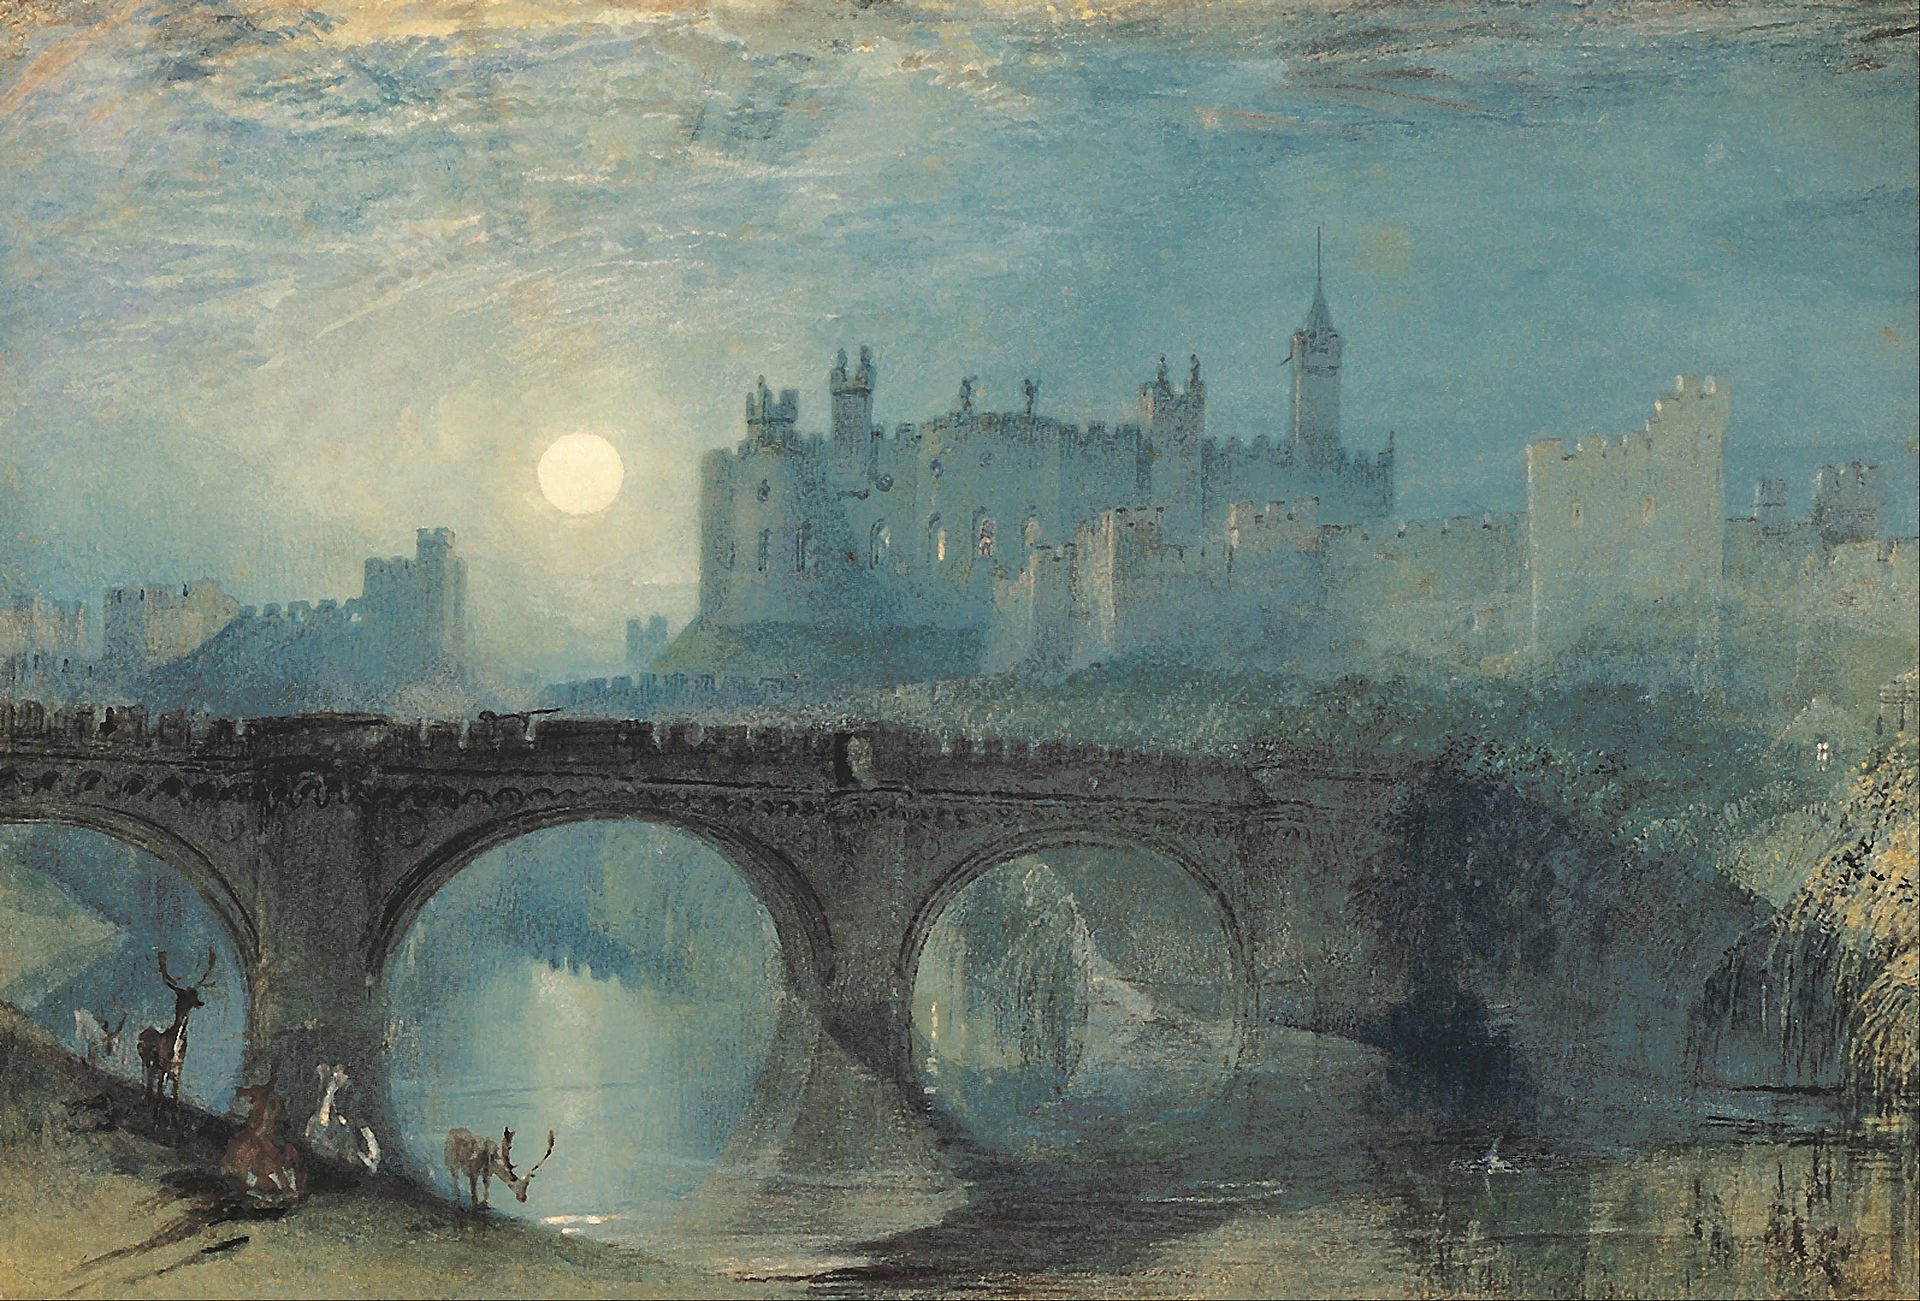 J. M. W. Turner, Architecture, Castle, Ancient, Tower, Painting, Classical art, Bridge, Animals, Deer, River, England, Arch, Traditional art, Shadow Wallpaper